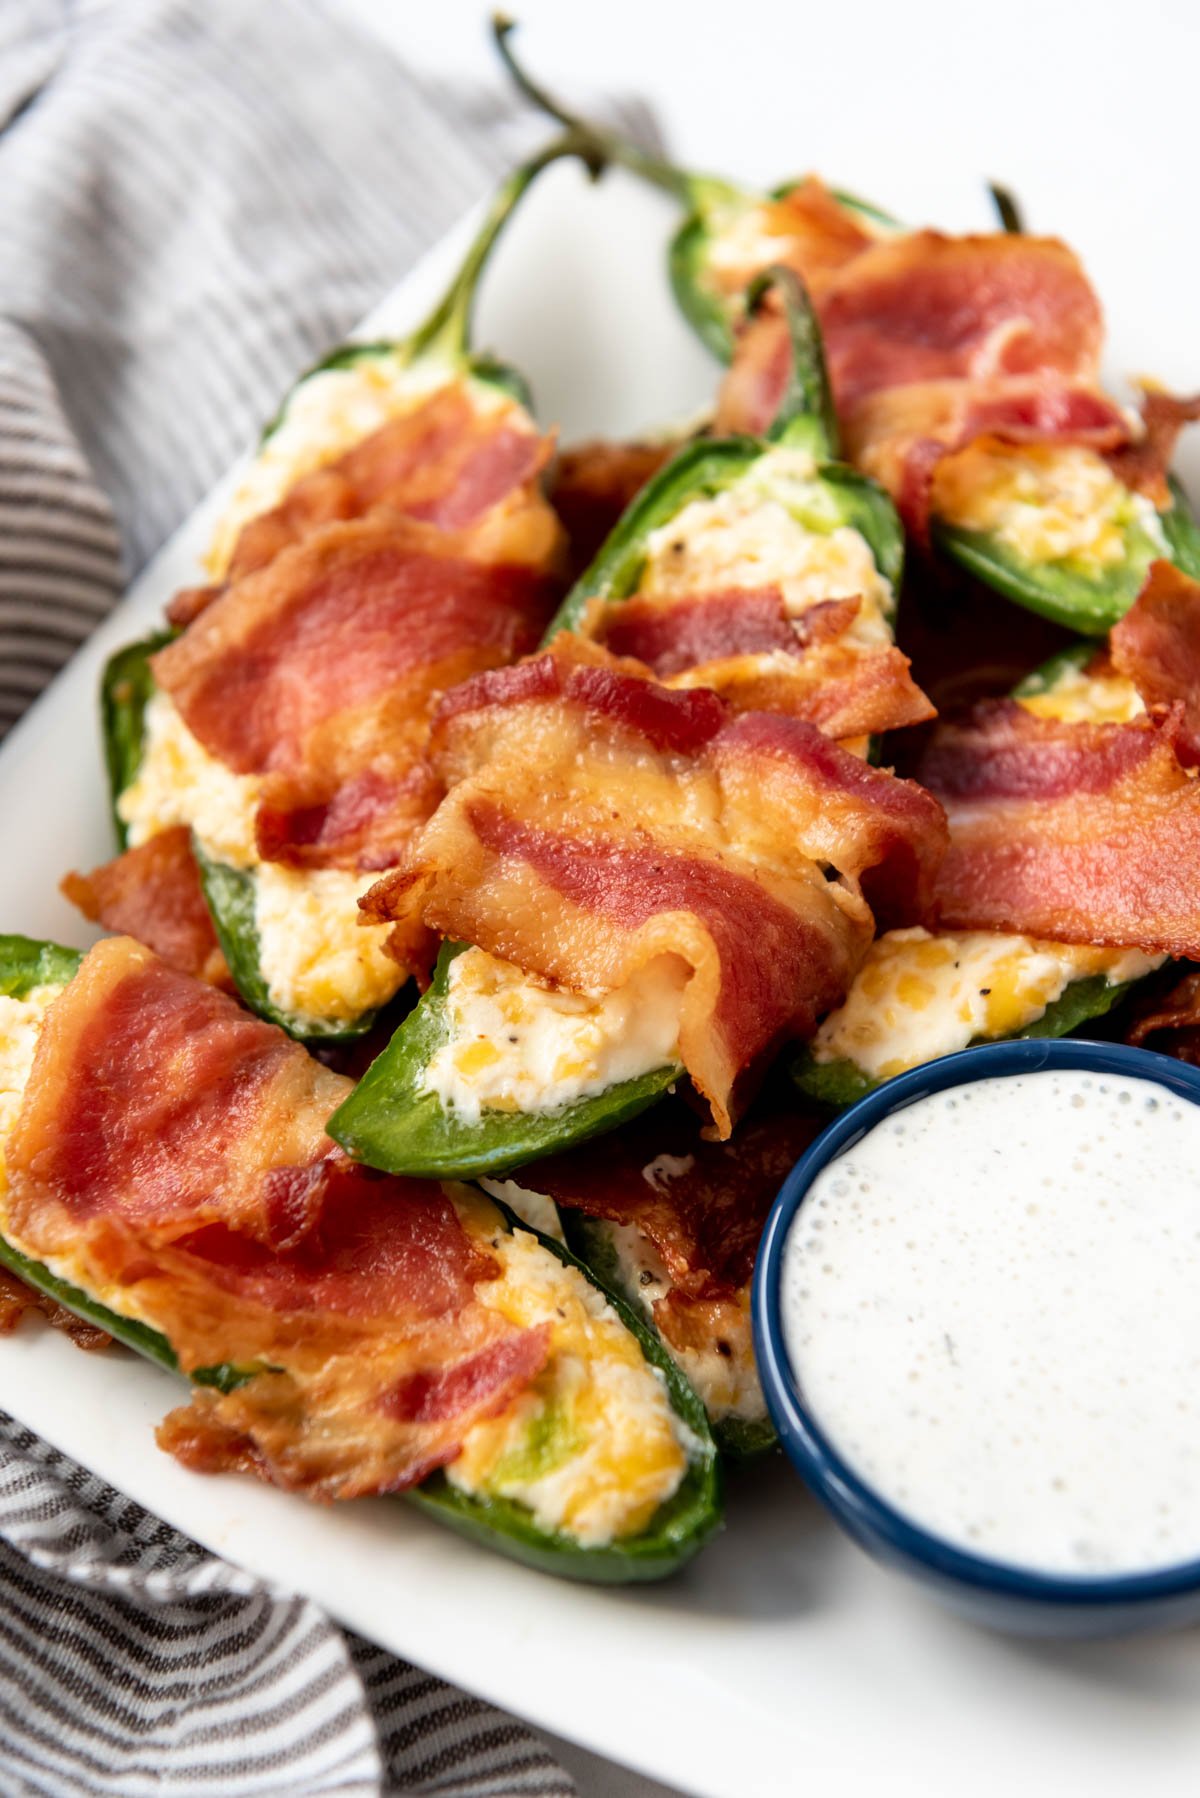 Bacon wrapped jalapeno poppers on a plate with ranch dipping sauce.